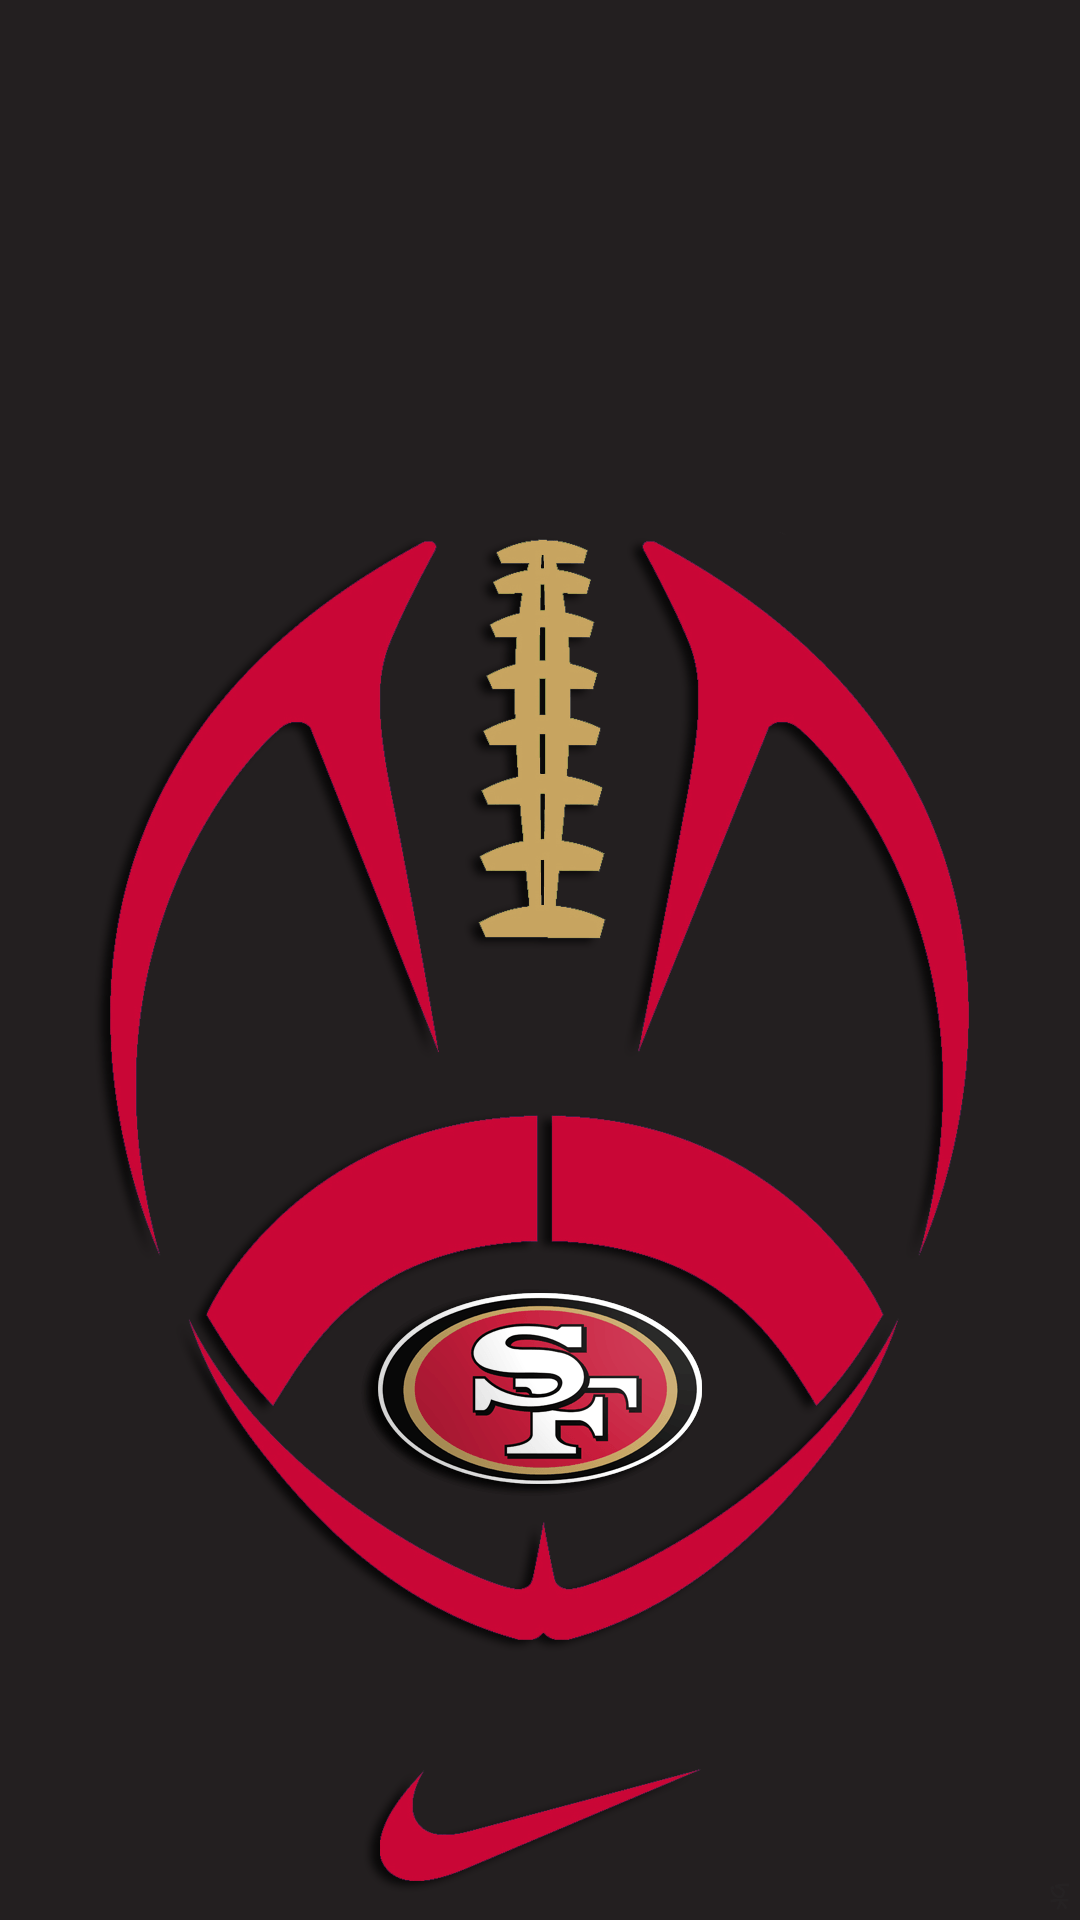 49ers Wallpaper For Iphone 5 galleryhipcom   The